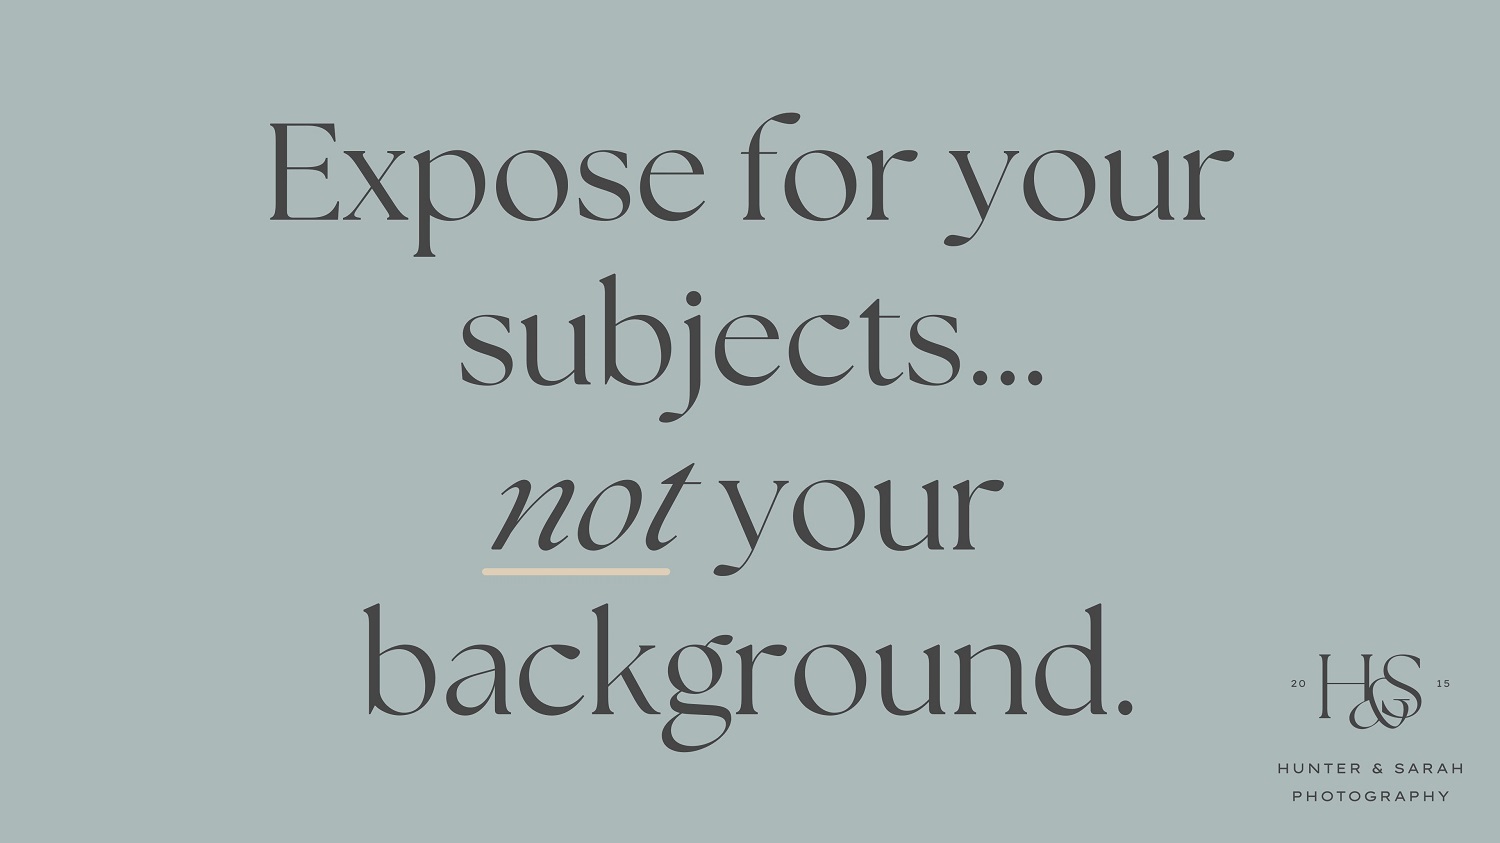 Expose for your subjects... not your background.